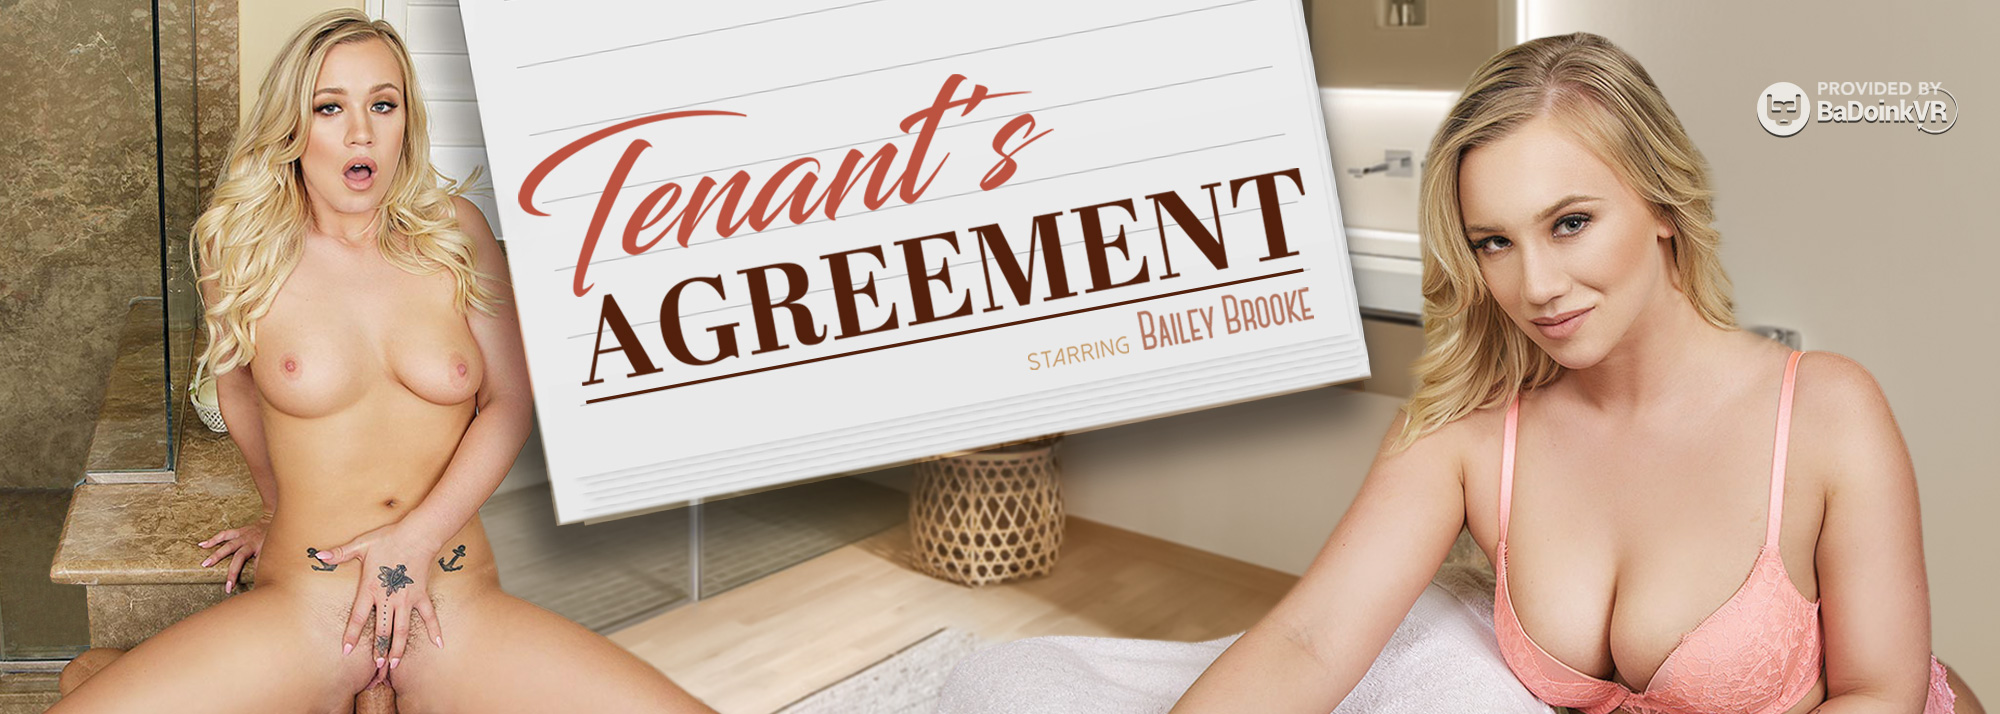 Tenant's Agreement - VR Porn Video, Starring: Bailey Brooke